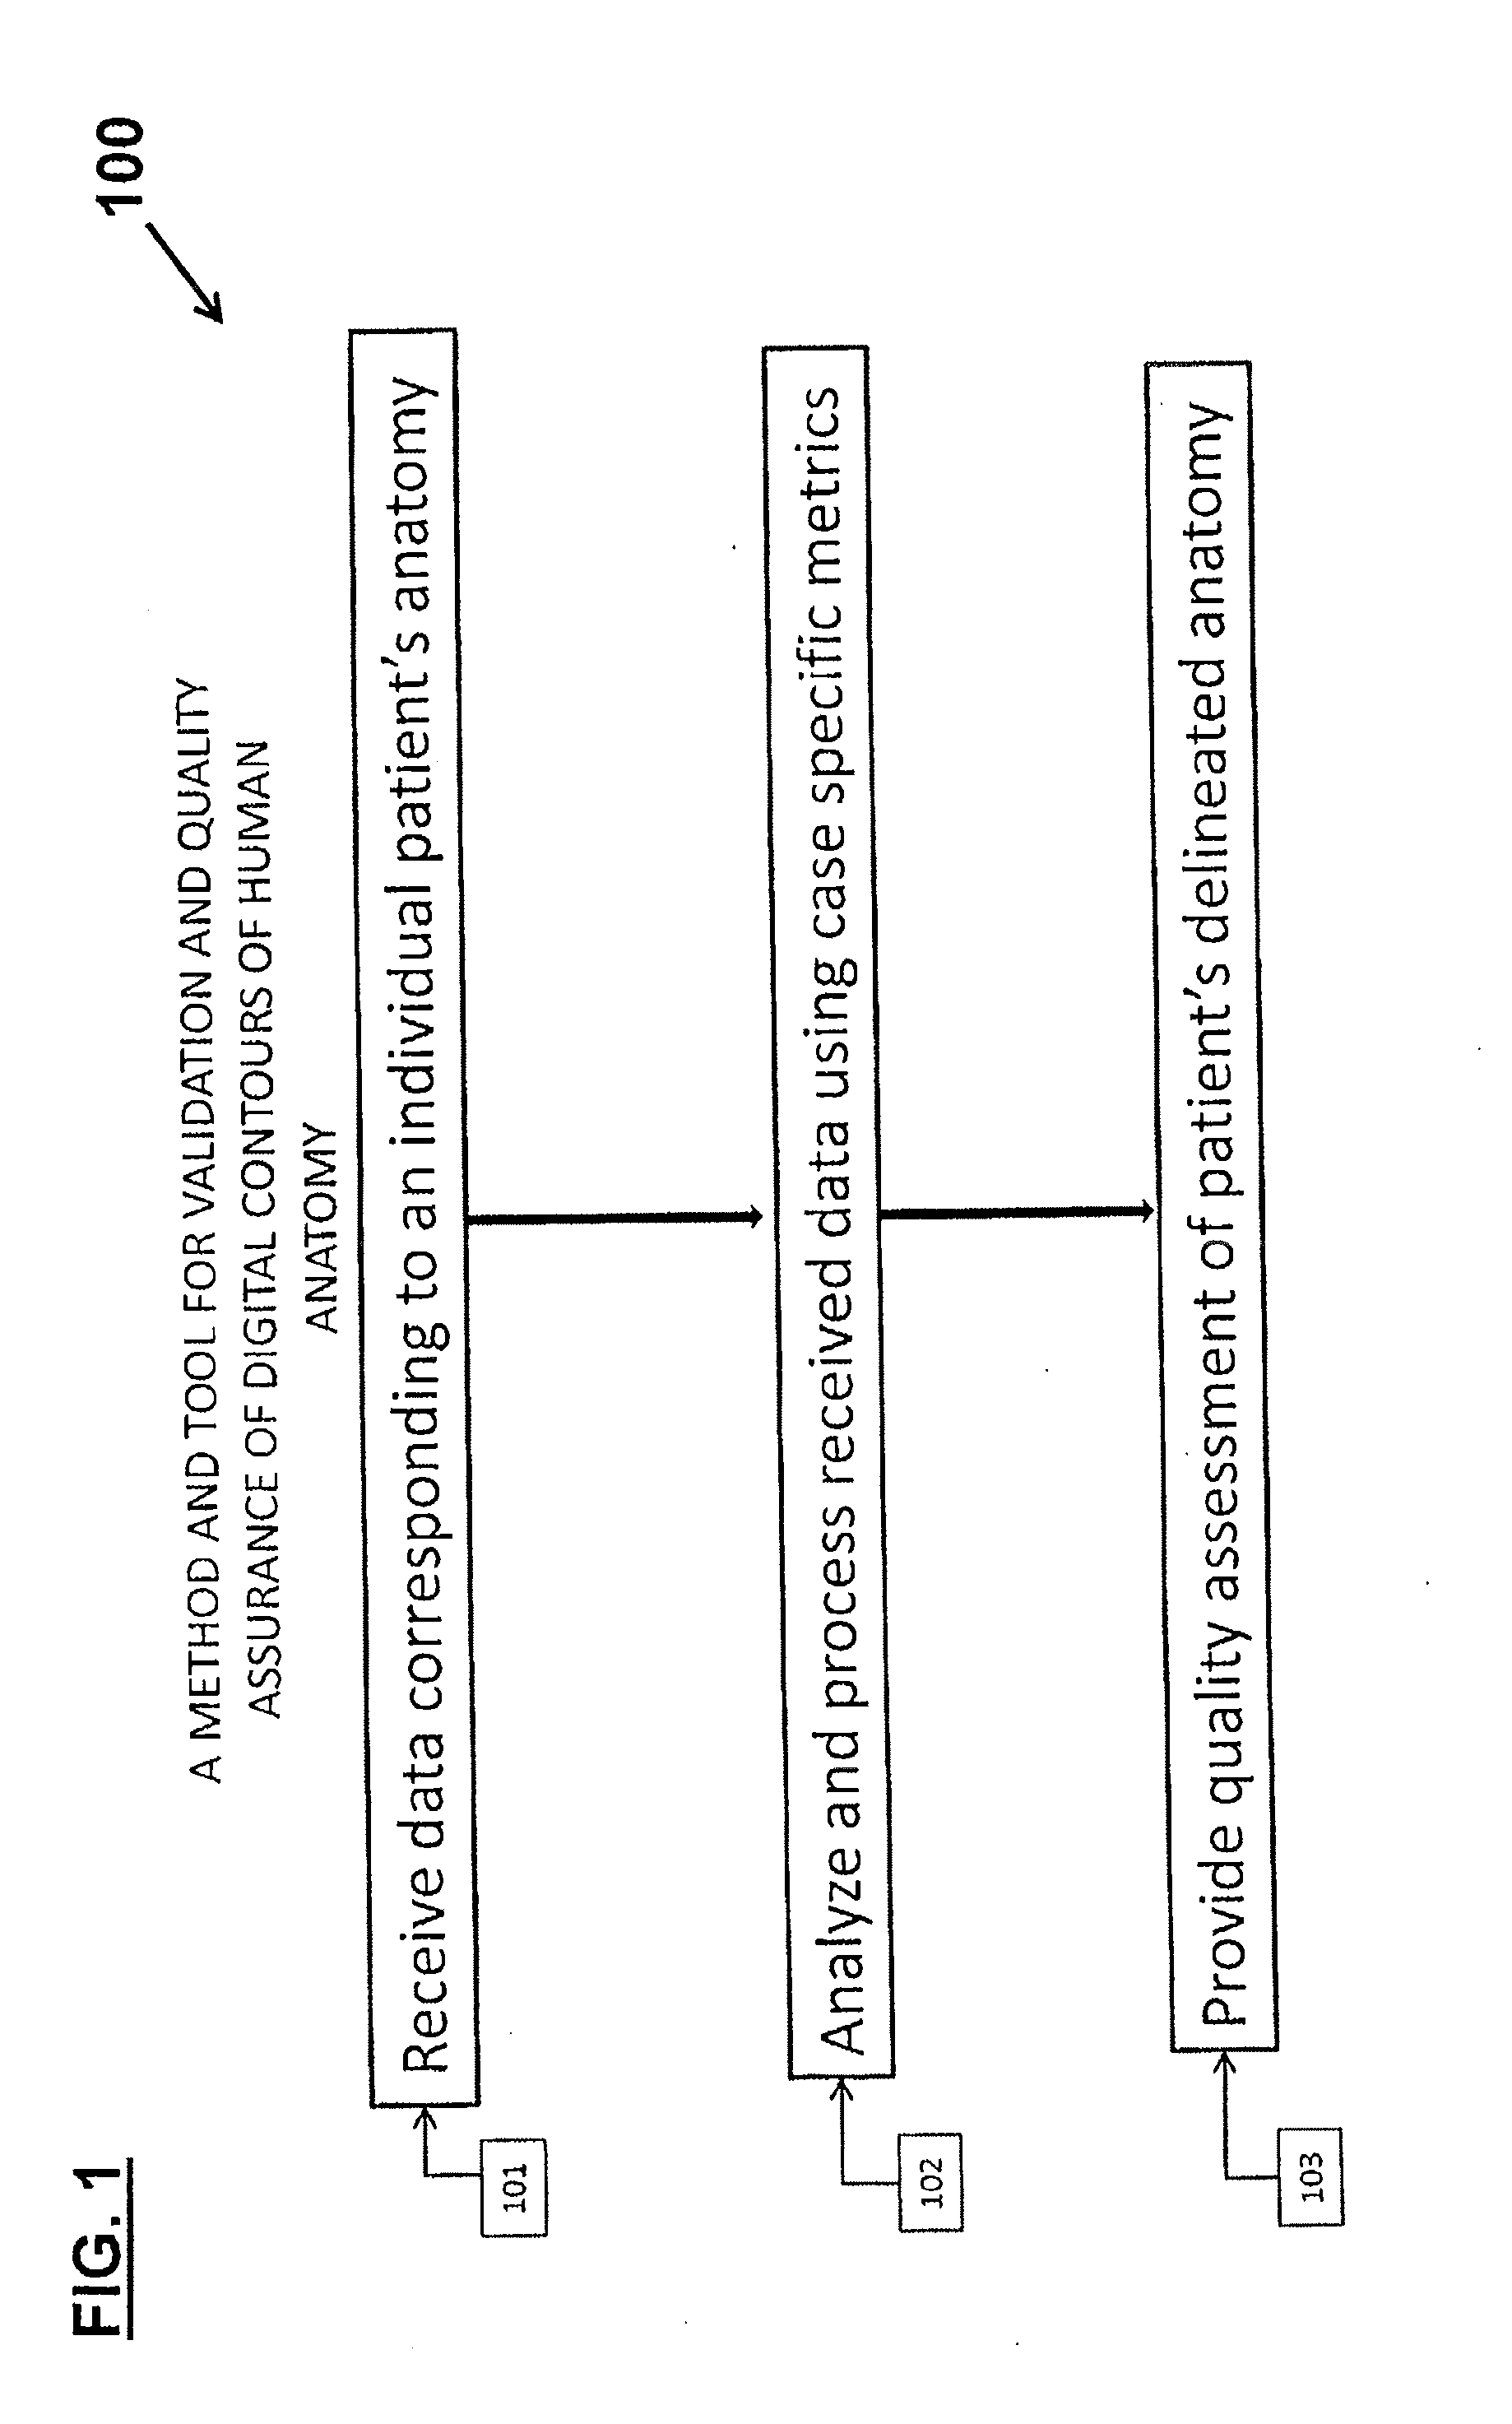 System and Method for the Validation and Quality Assurance of Computerized Contours of Human Anatomy